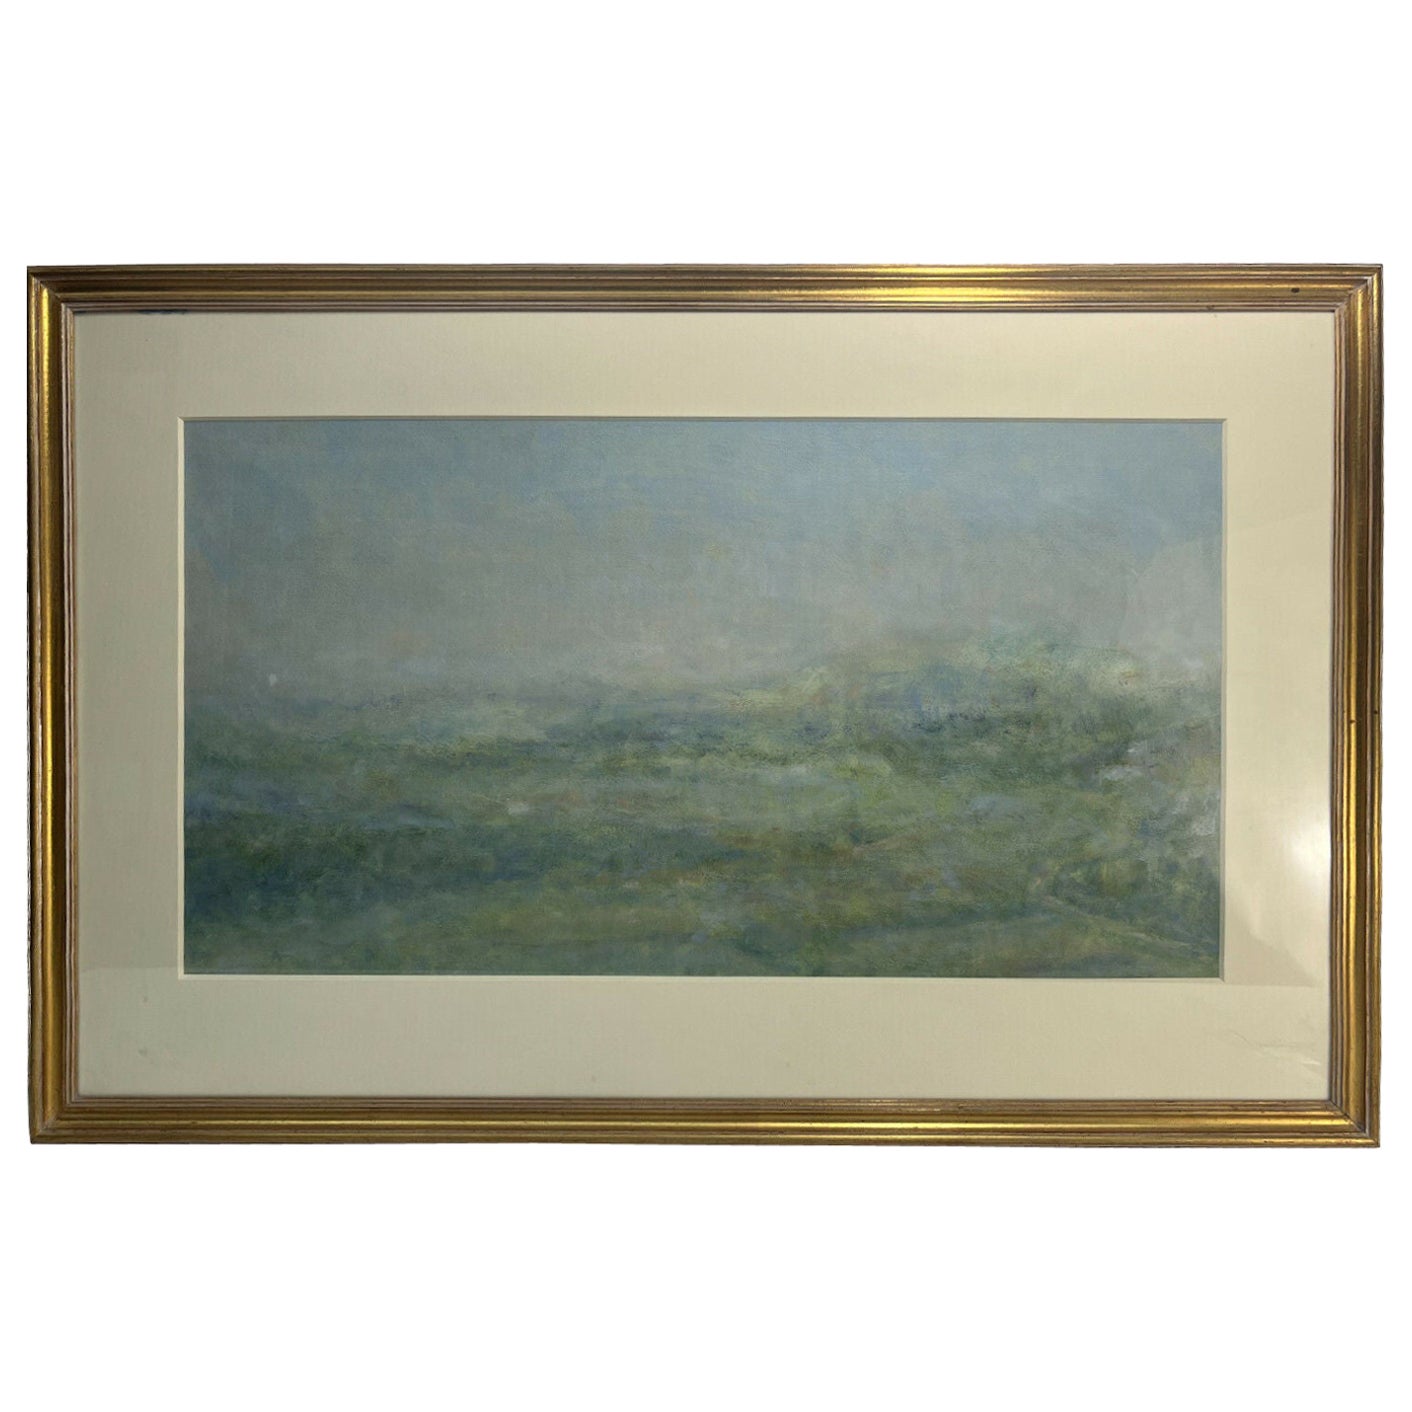 Oil on Board Painting Landscape, Signed, by Tad Spurgeon, 1996